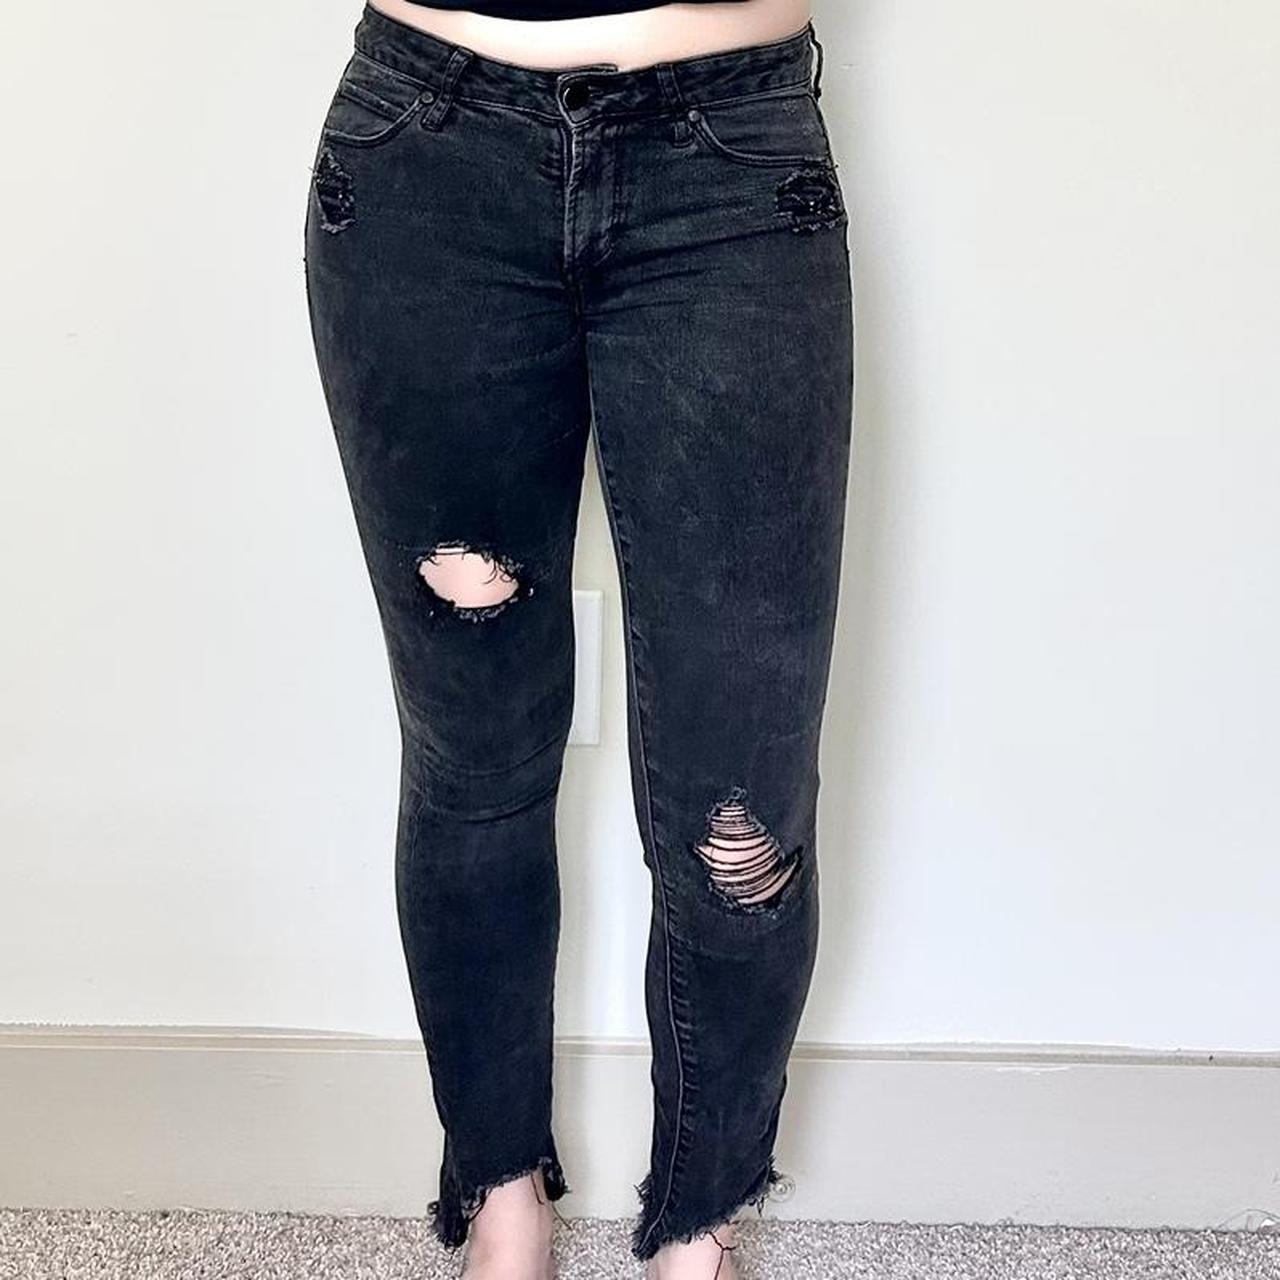 Articles of Society Women's Black and Grey Jeans